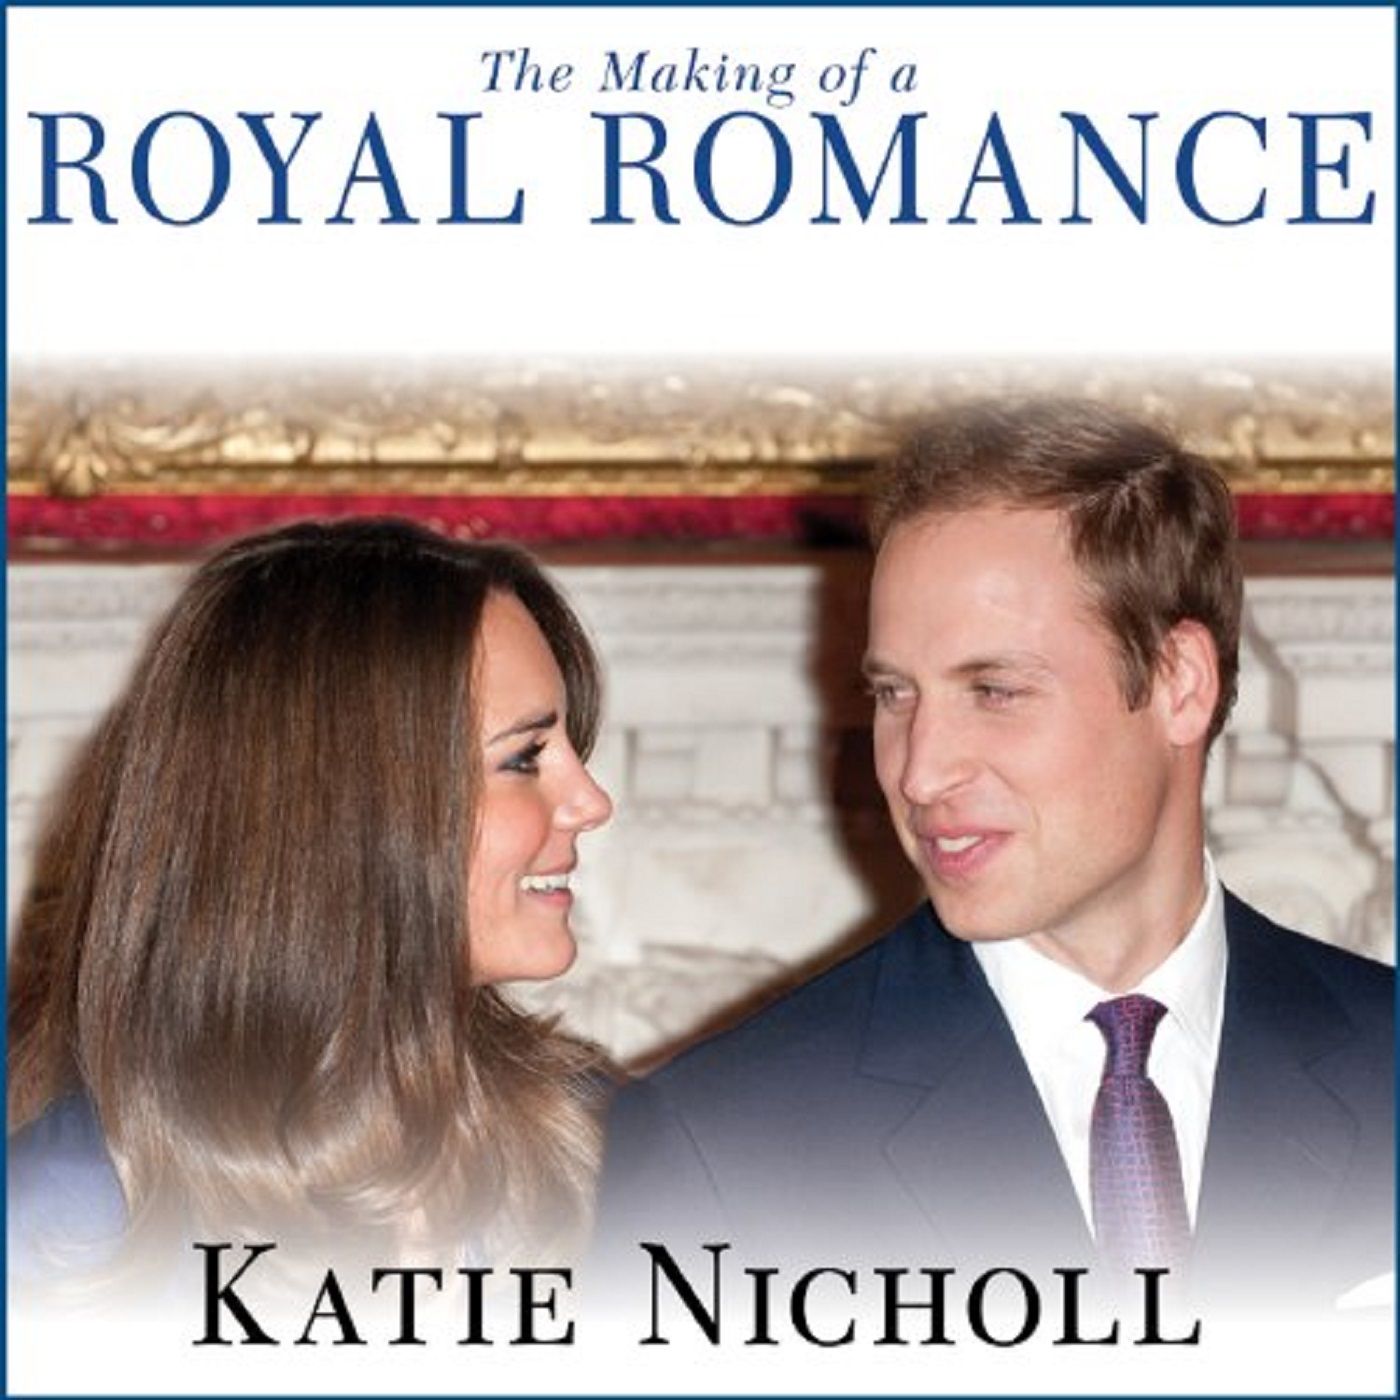 The Making of a Royal Romance by Katie Nicholl ch2